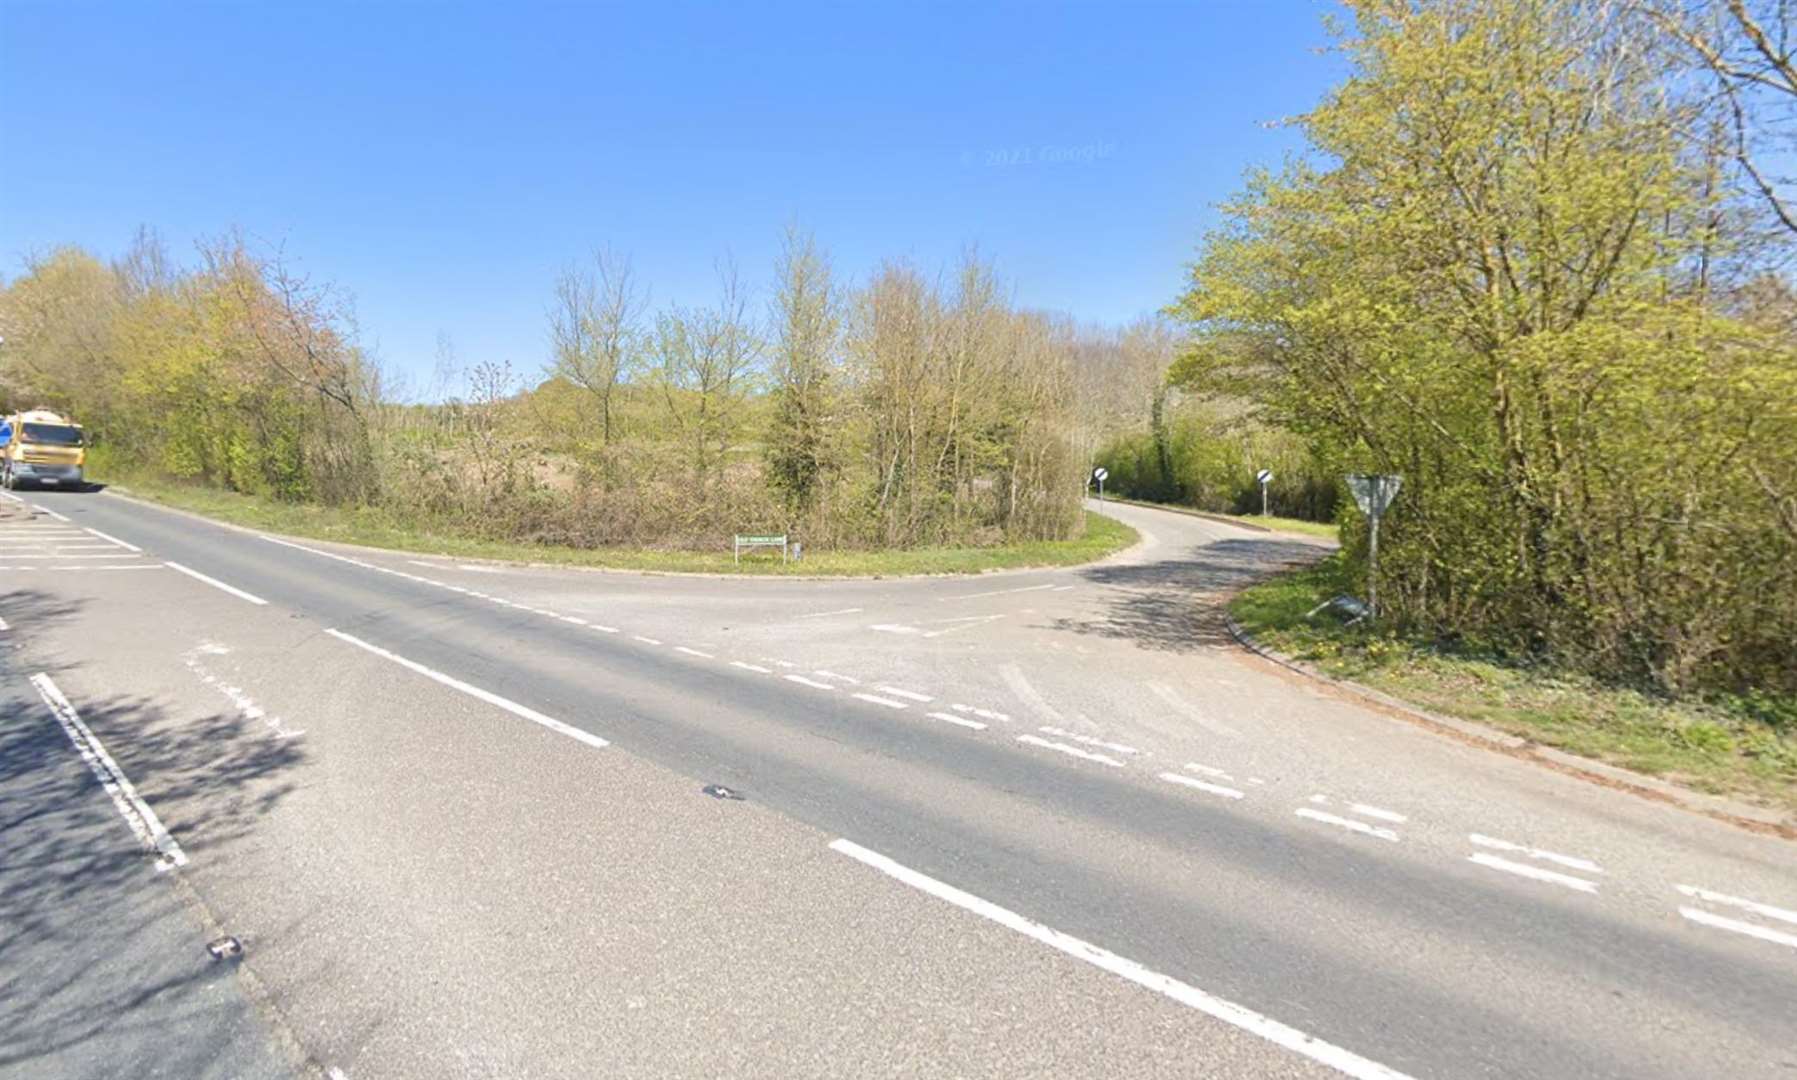 The accident happened at the junction of Old Church Lane and Seven Mile Lane, East Peckham. Picture: Google